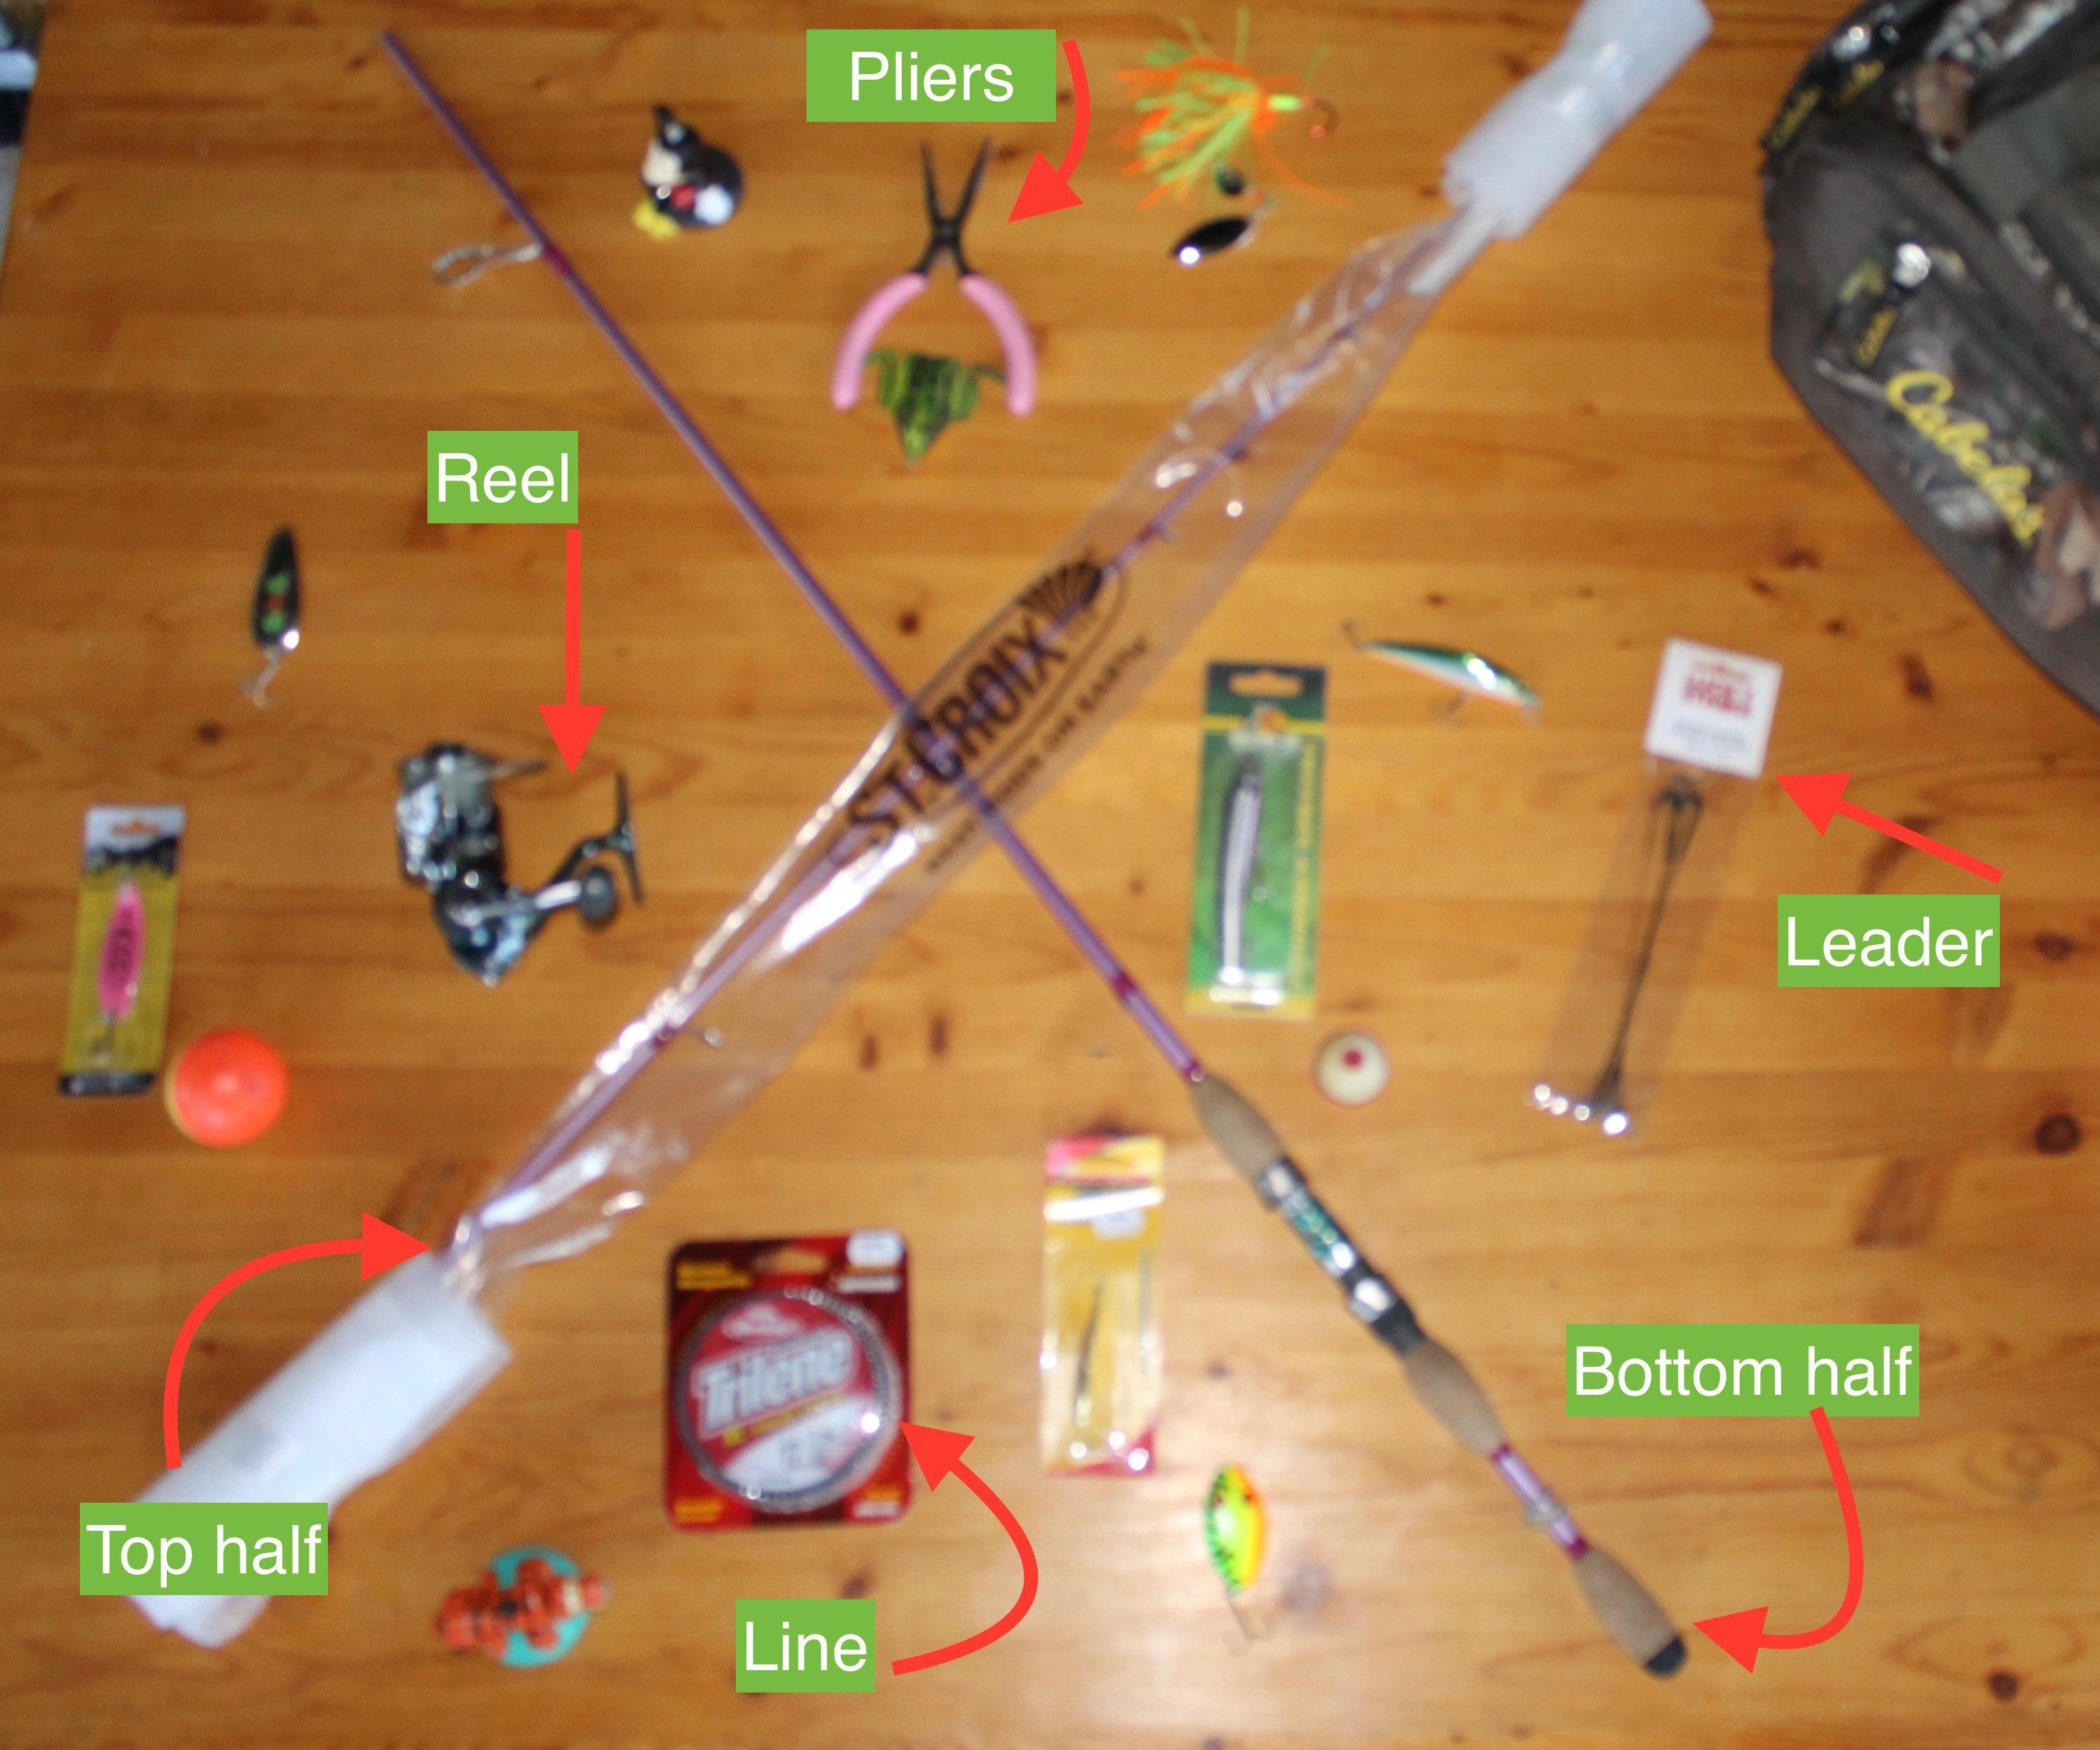 How to Set Up a Fishing Rod: Spinning Reel